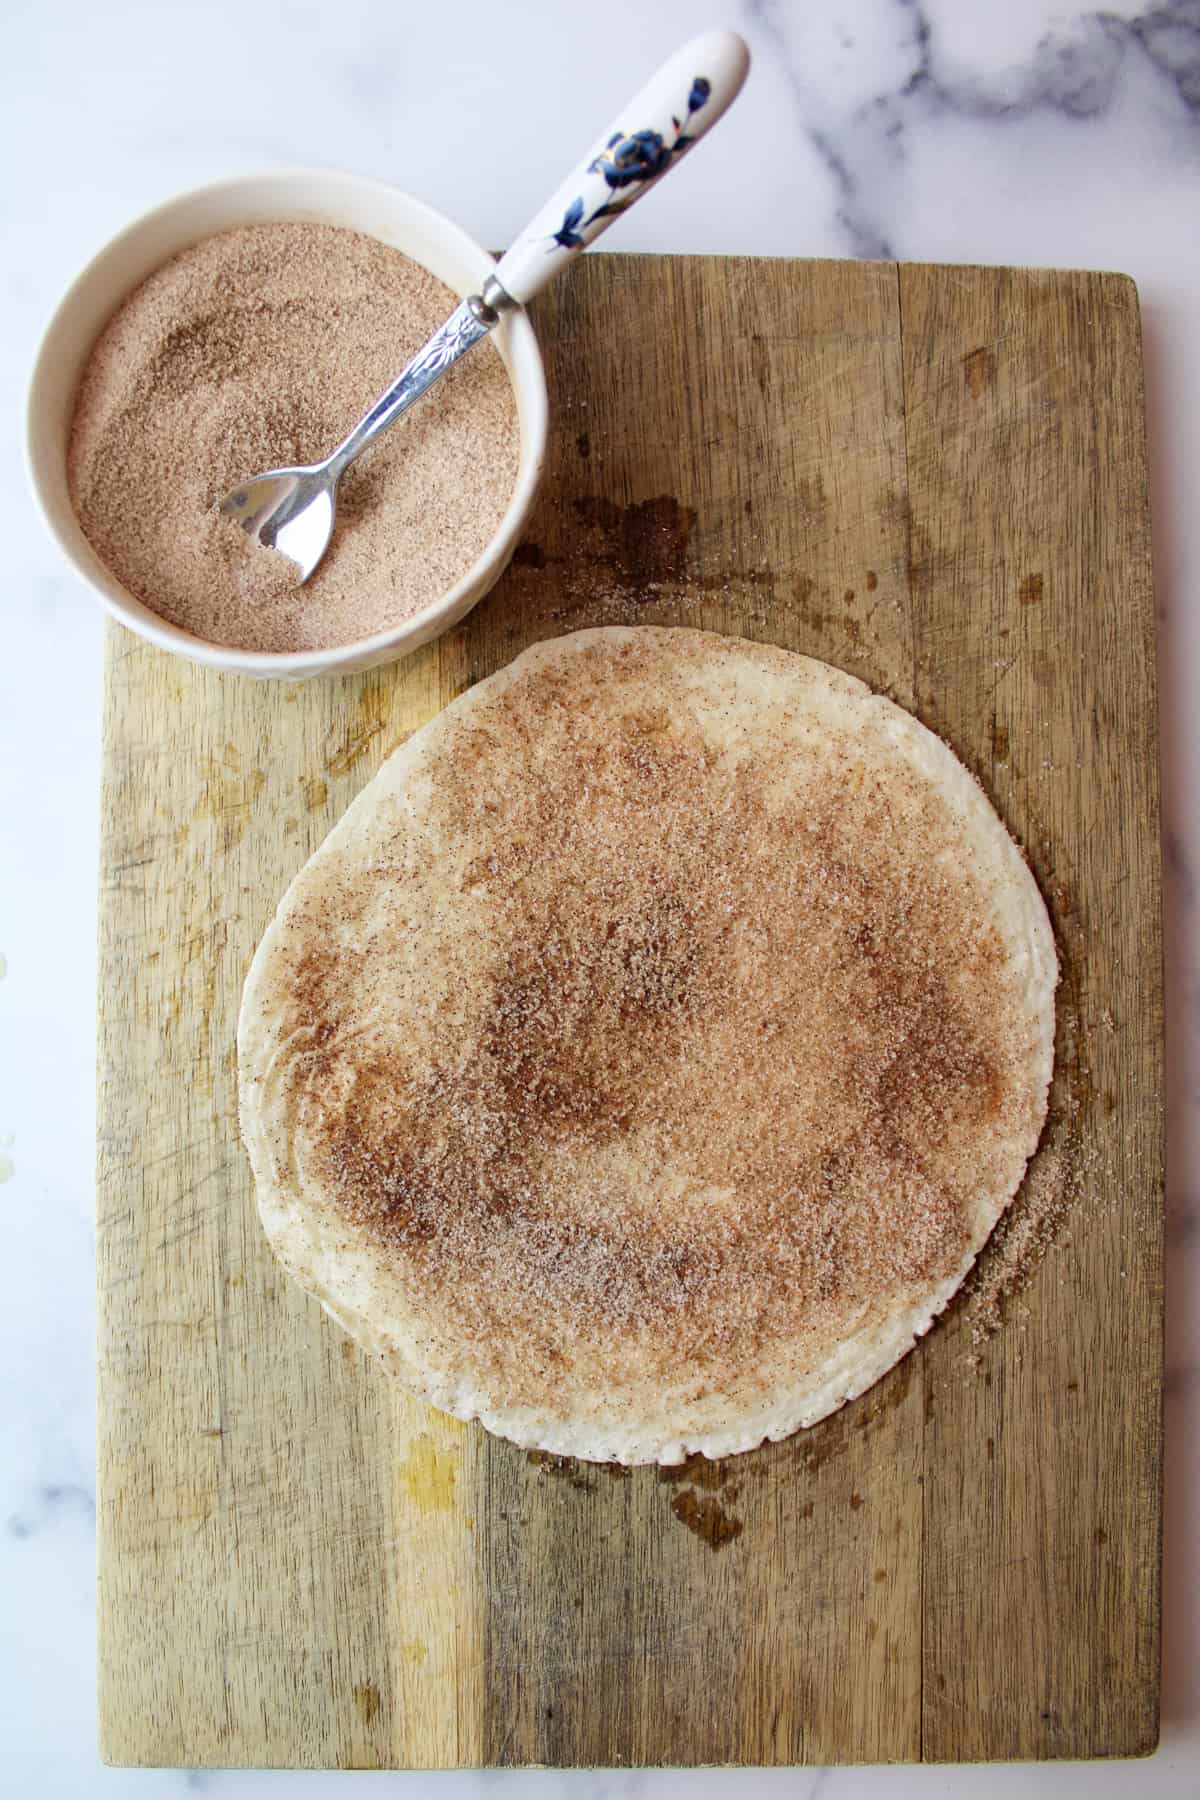 cinnamon sugar rubbed over tortilla with a bowl of cinnamon sugar and a spoon to the side